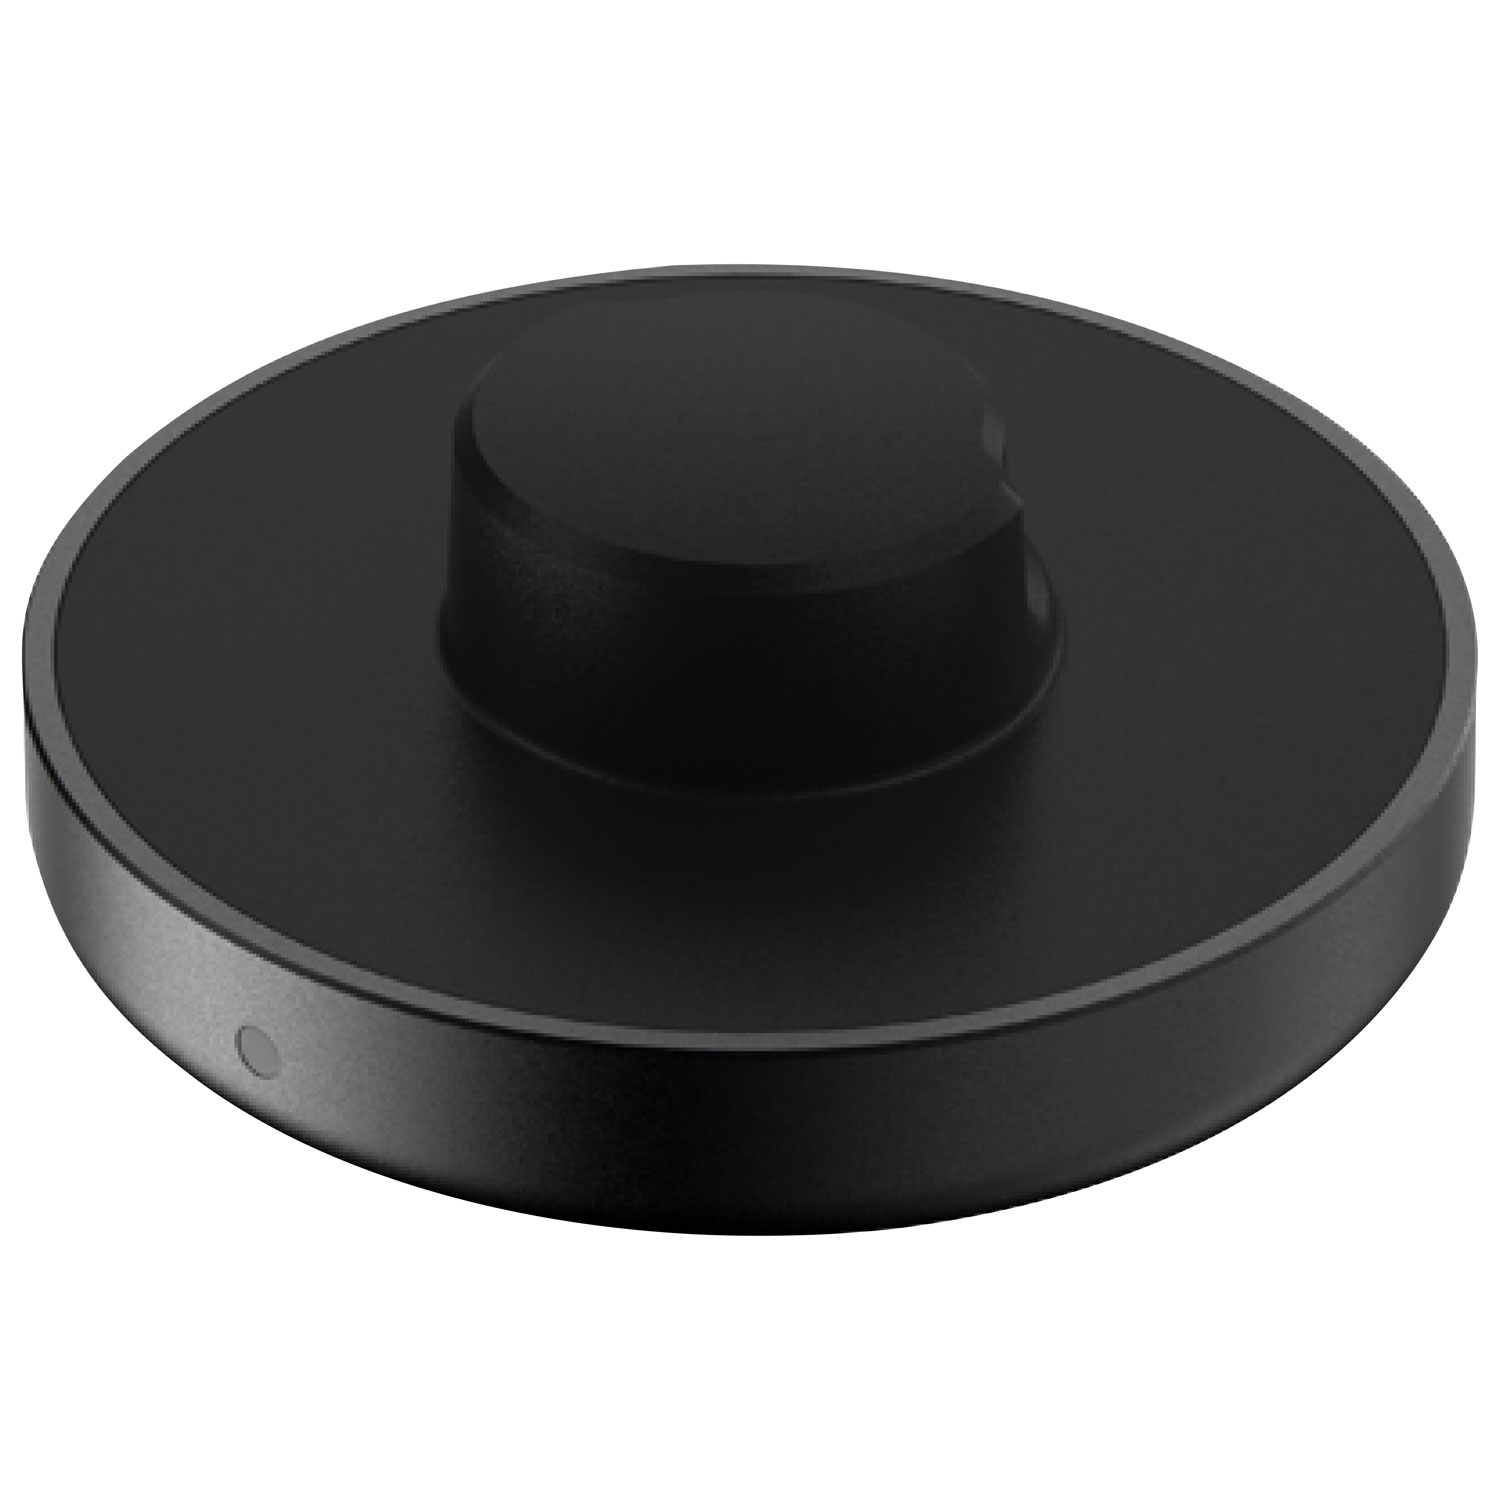 Oura Ring Gen3 - Heritage - Size 7 - Stealth | Best Buy Canada